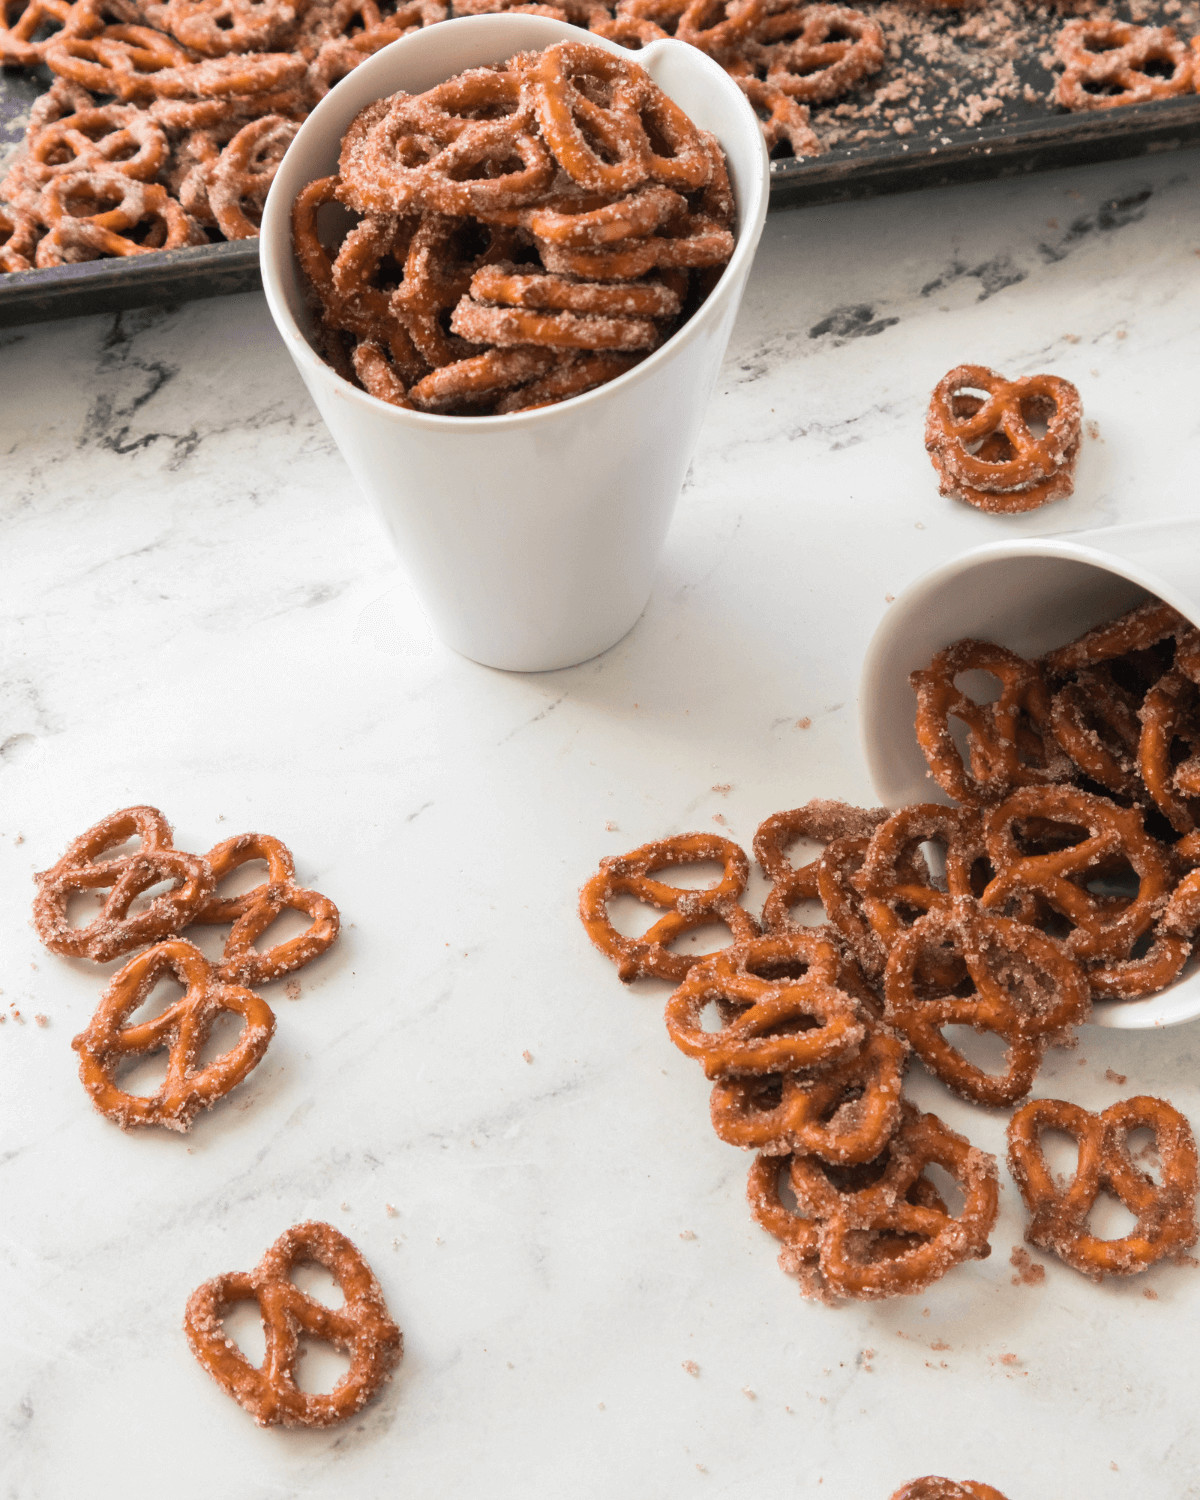 The cinnamon sugar pretzels spilling out of the container.